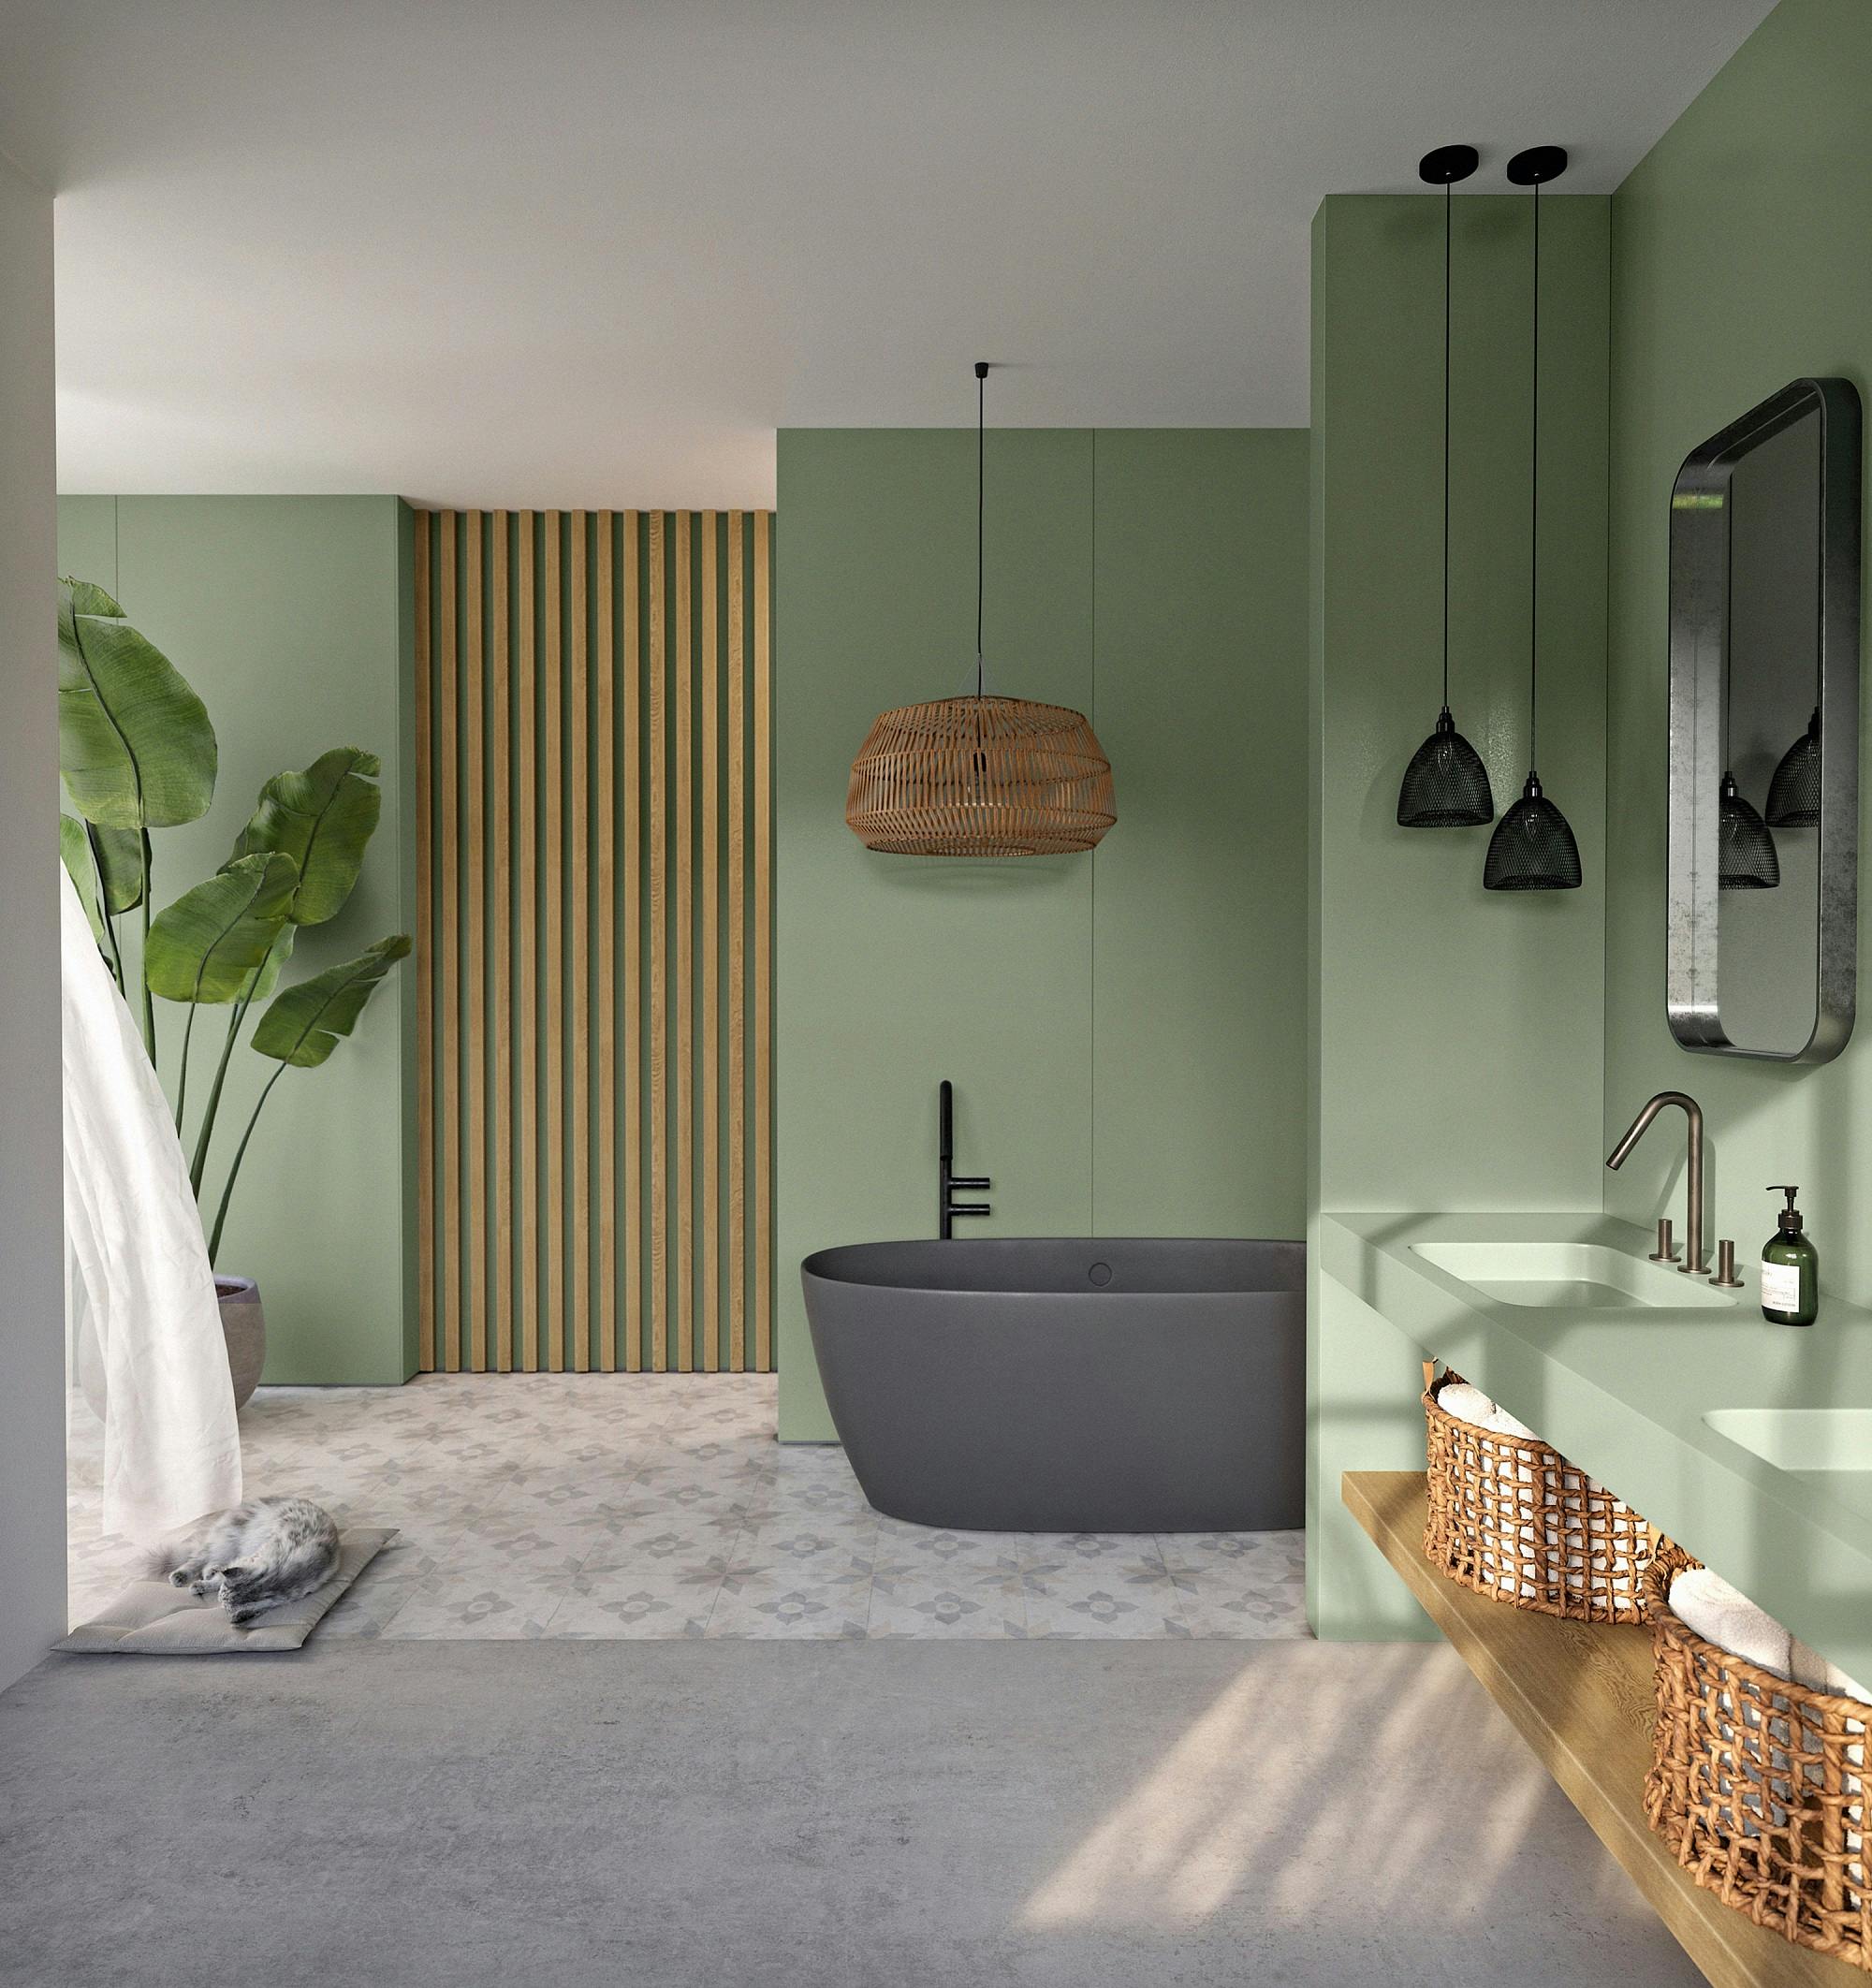 The master bathroom, the new central space in your home